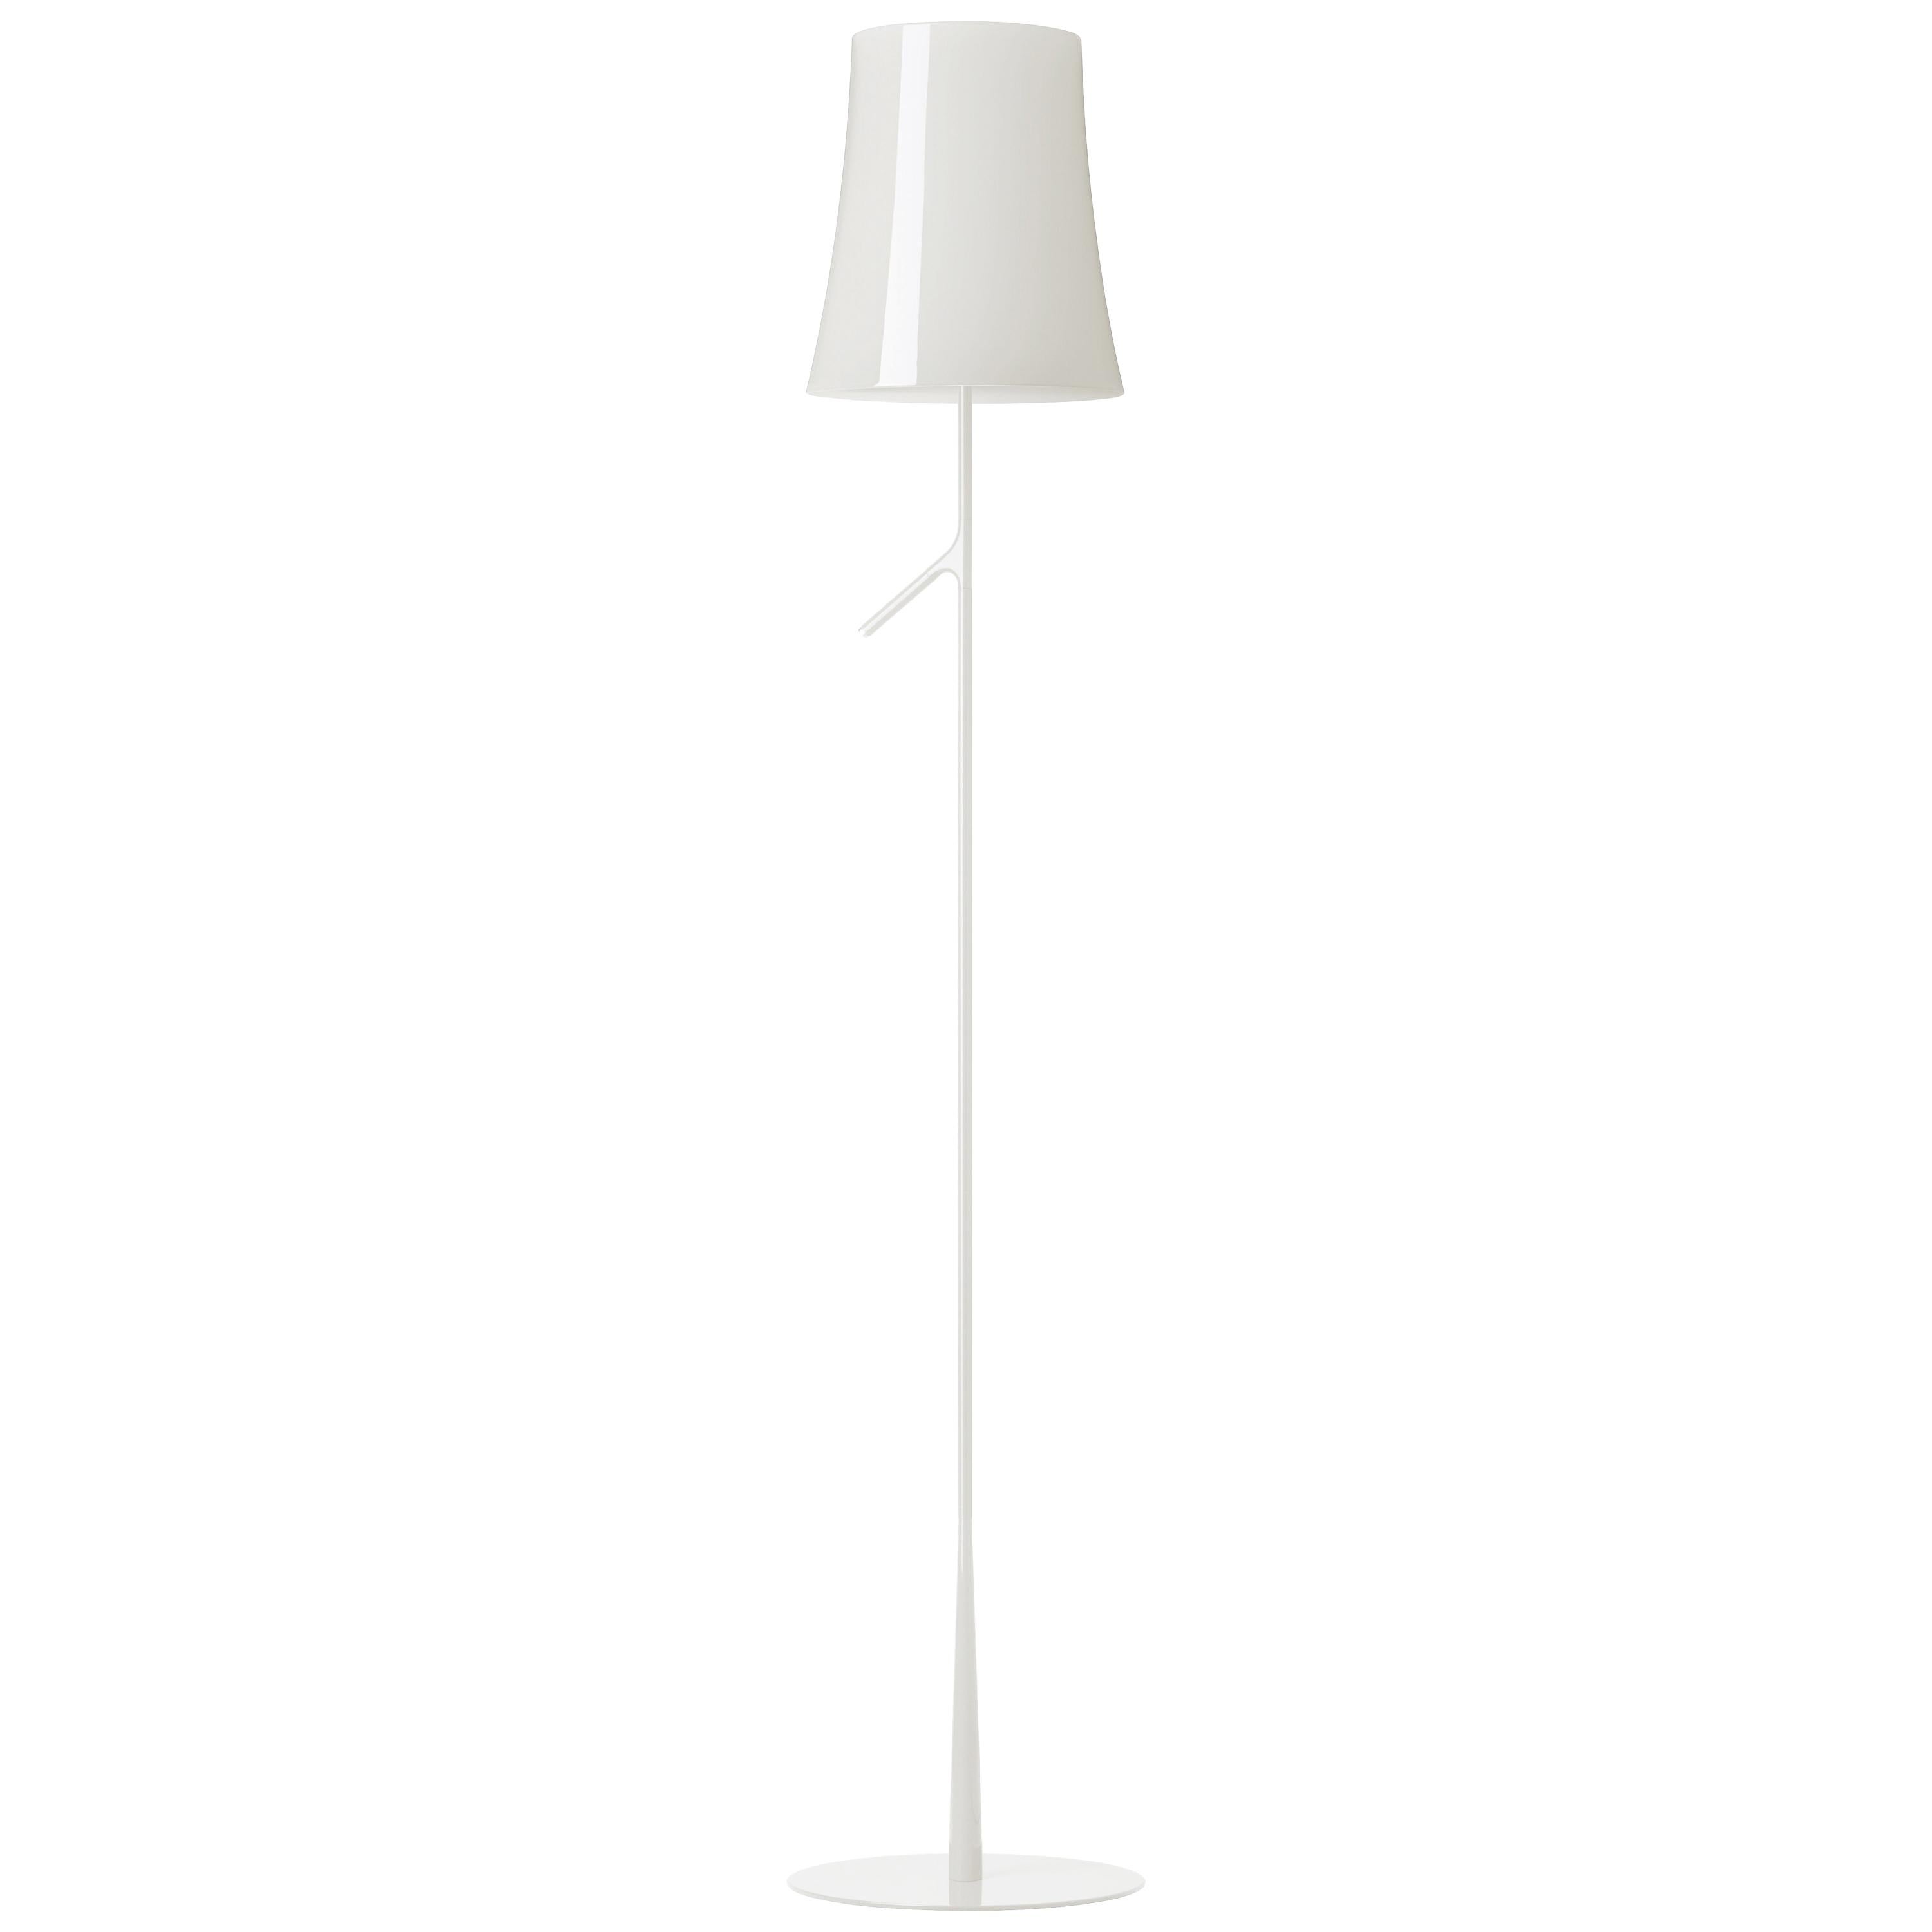 Foscarini Dimmable Birdie Floor Lamp in White by Ludovica & Roberto Palomba For Sale